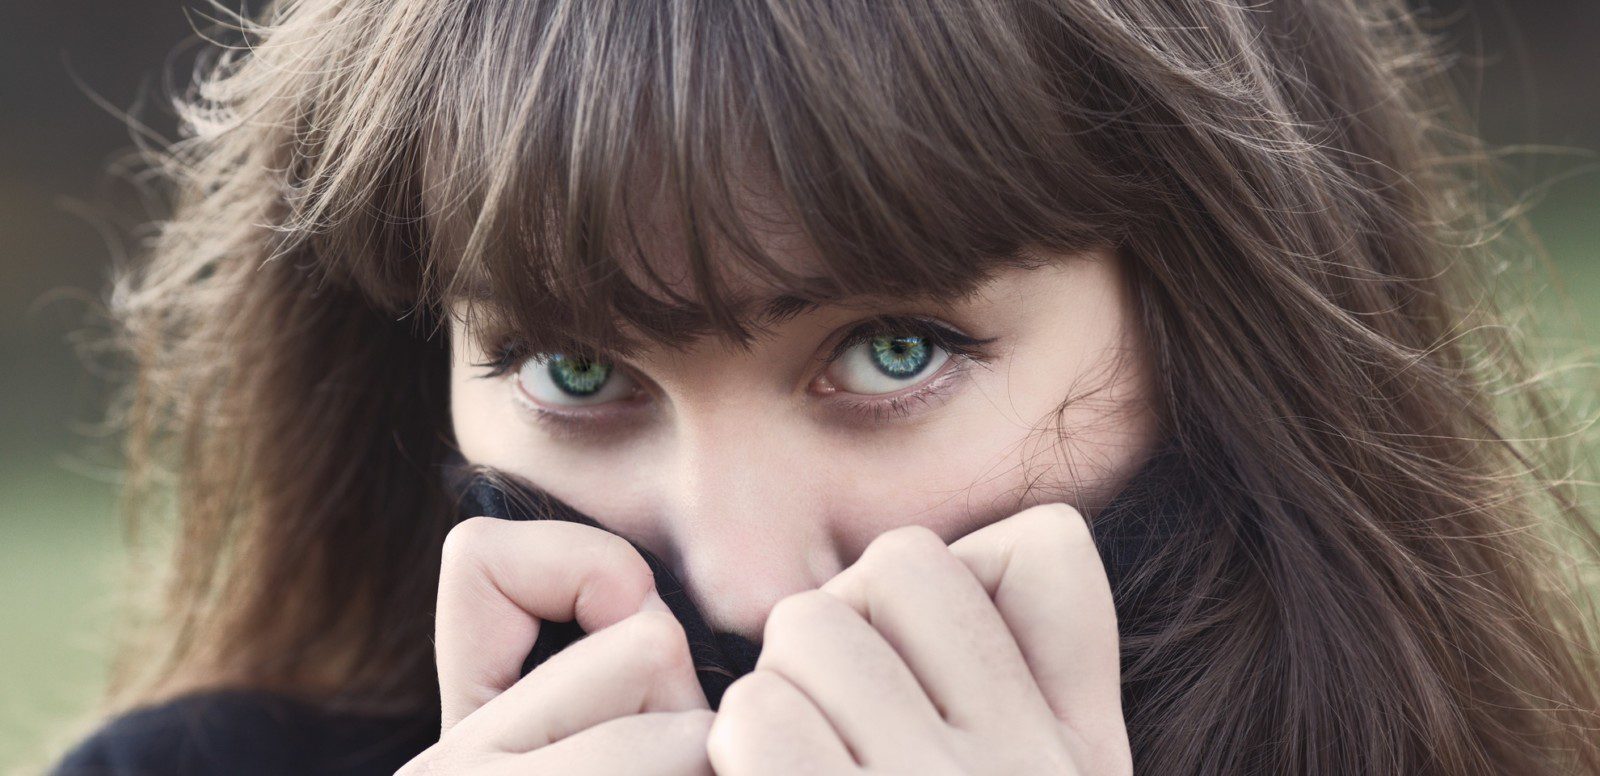 5 Things People With Social Anxiety Need You To Know